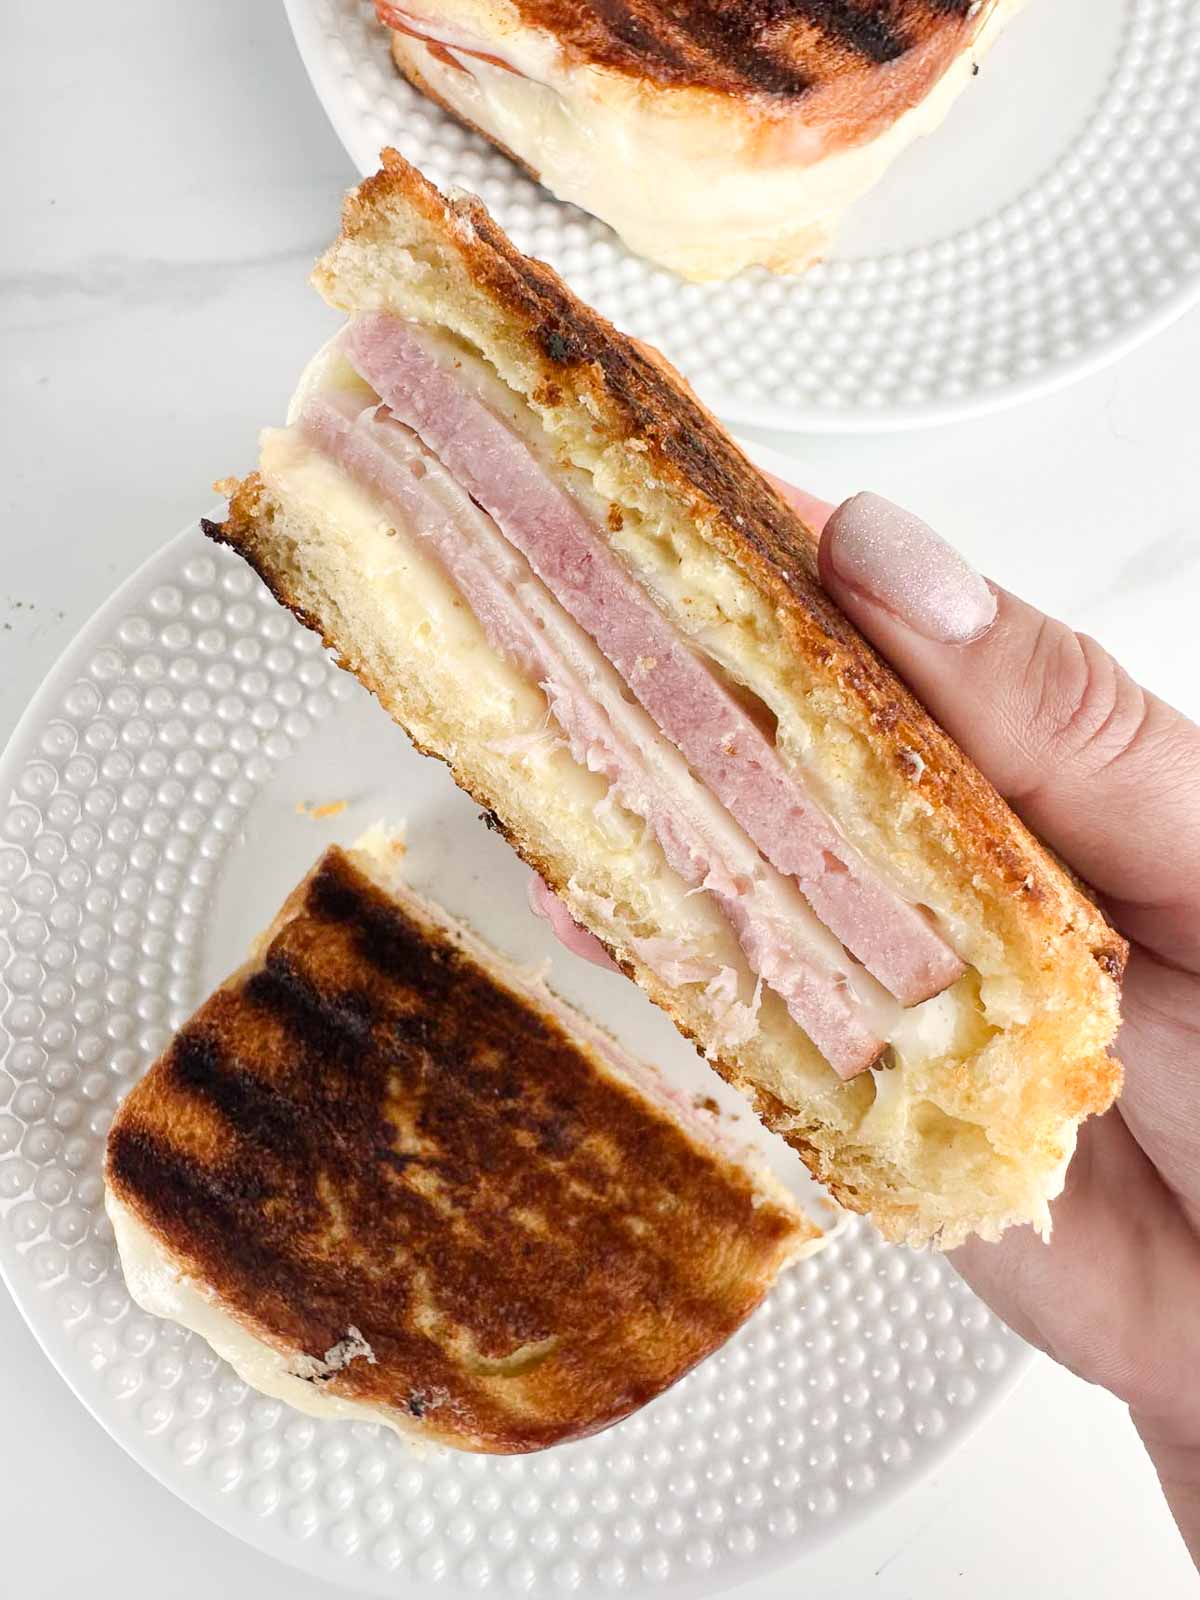 A hand holding half a ham and cheese panini showing the layers of cheese and meat